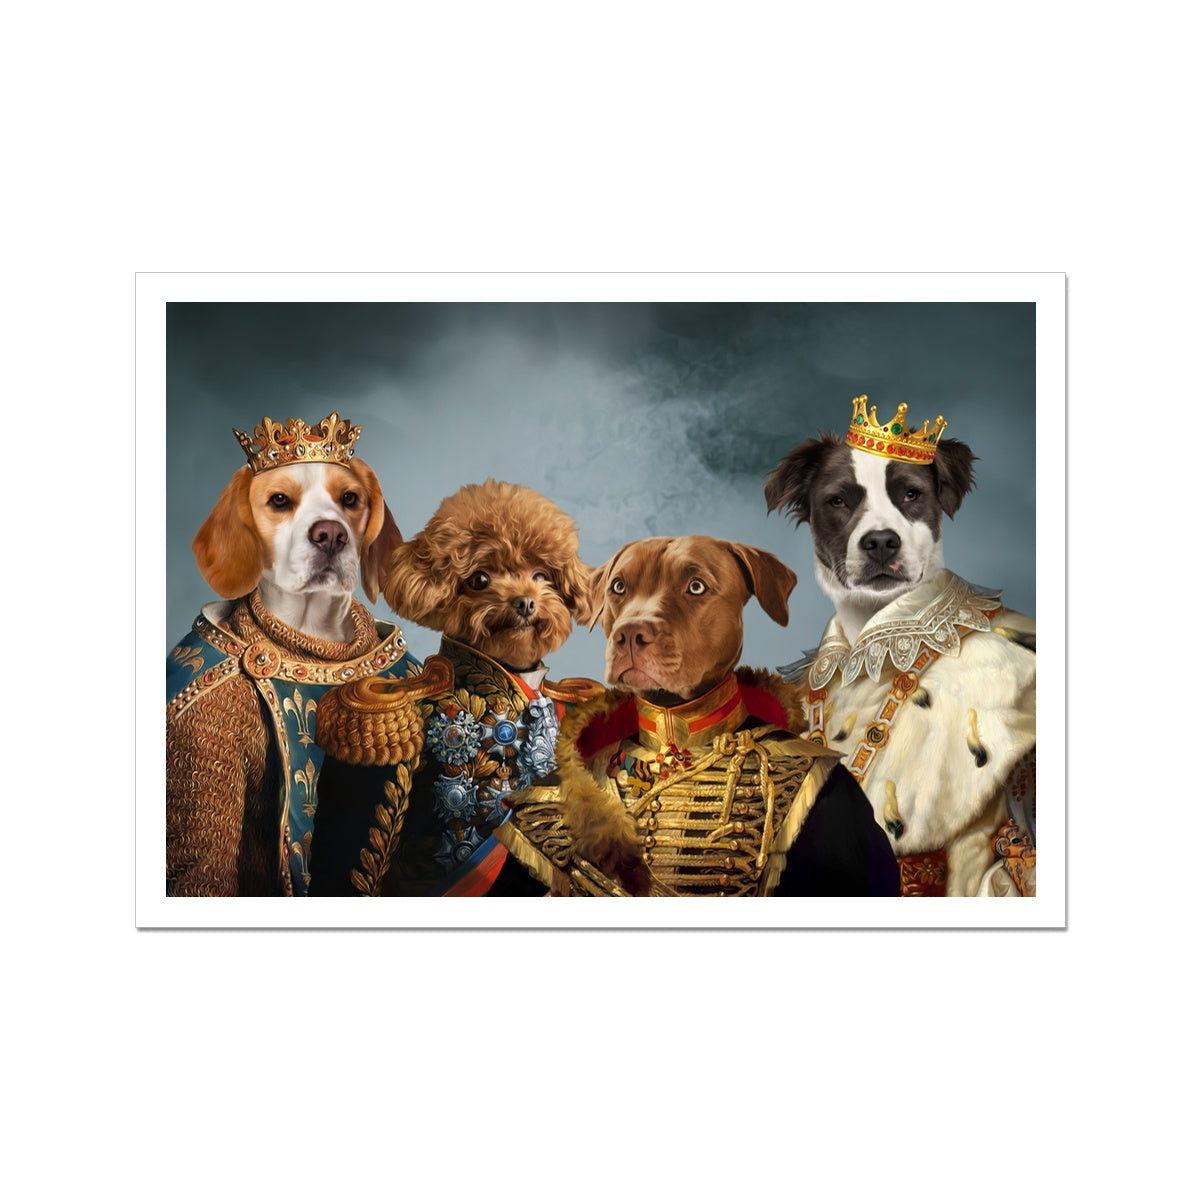 The Male Royals: Custom Pet Poster , Paw & Glory, paw and glory, paw and glory, pawandglory pet portrait from photo, puppy paintings, dog paintings from photo, custom pet, pawandglory, petportraits,